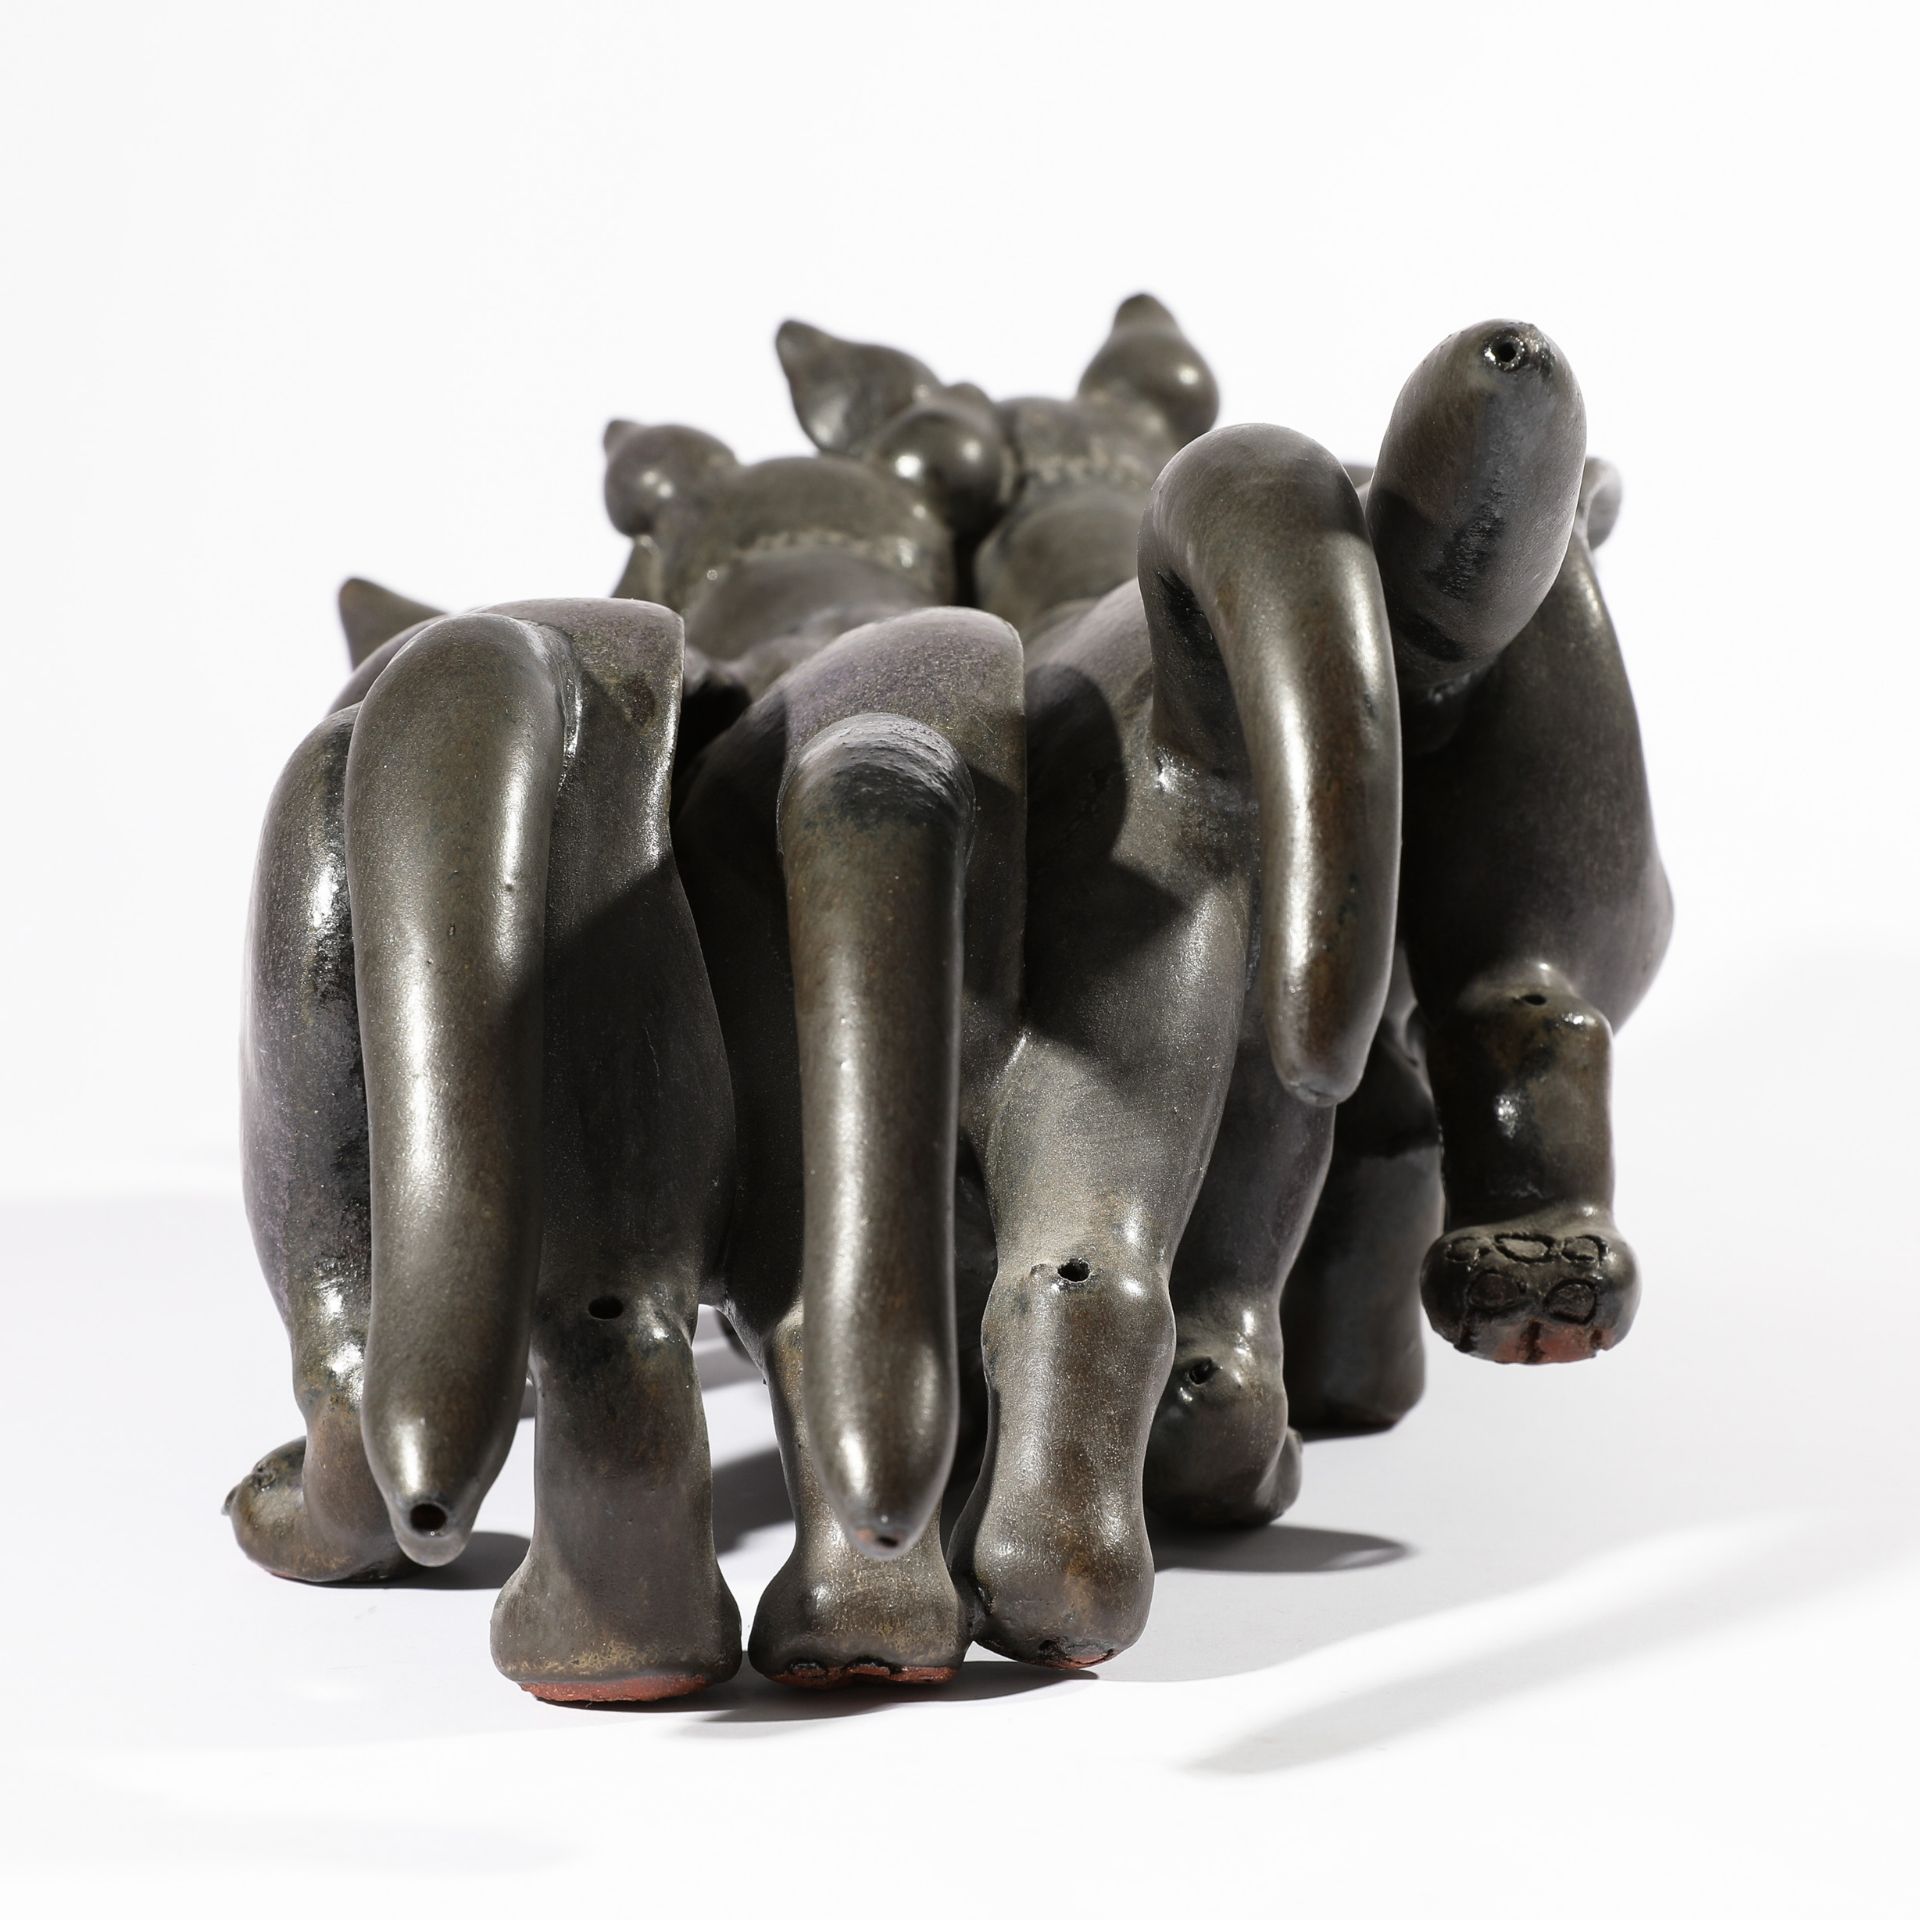 Beate Kuhn,4 cats mounted together - Image 4 of 7